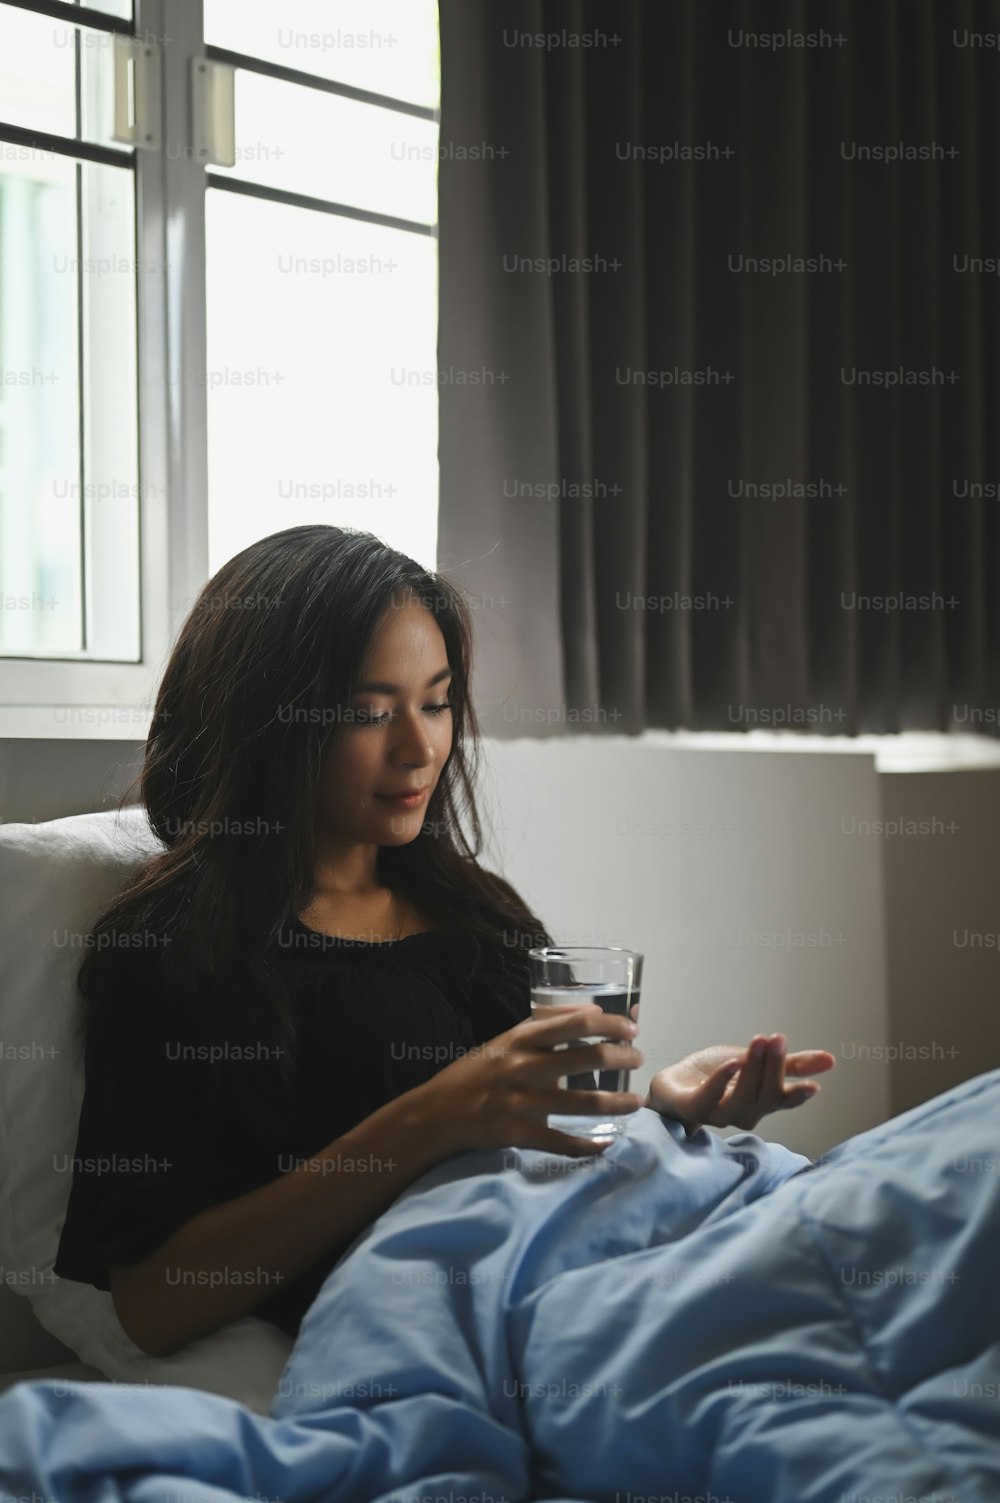 An ill woman is holding a glass of water and consuming a pill at the bed.